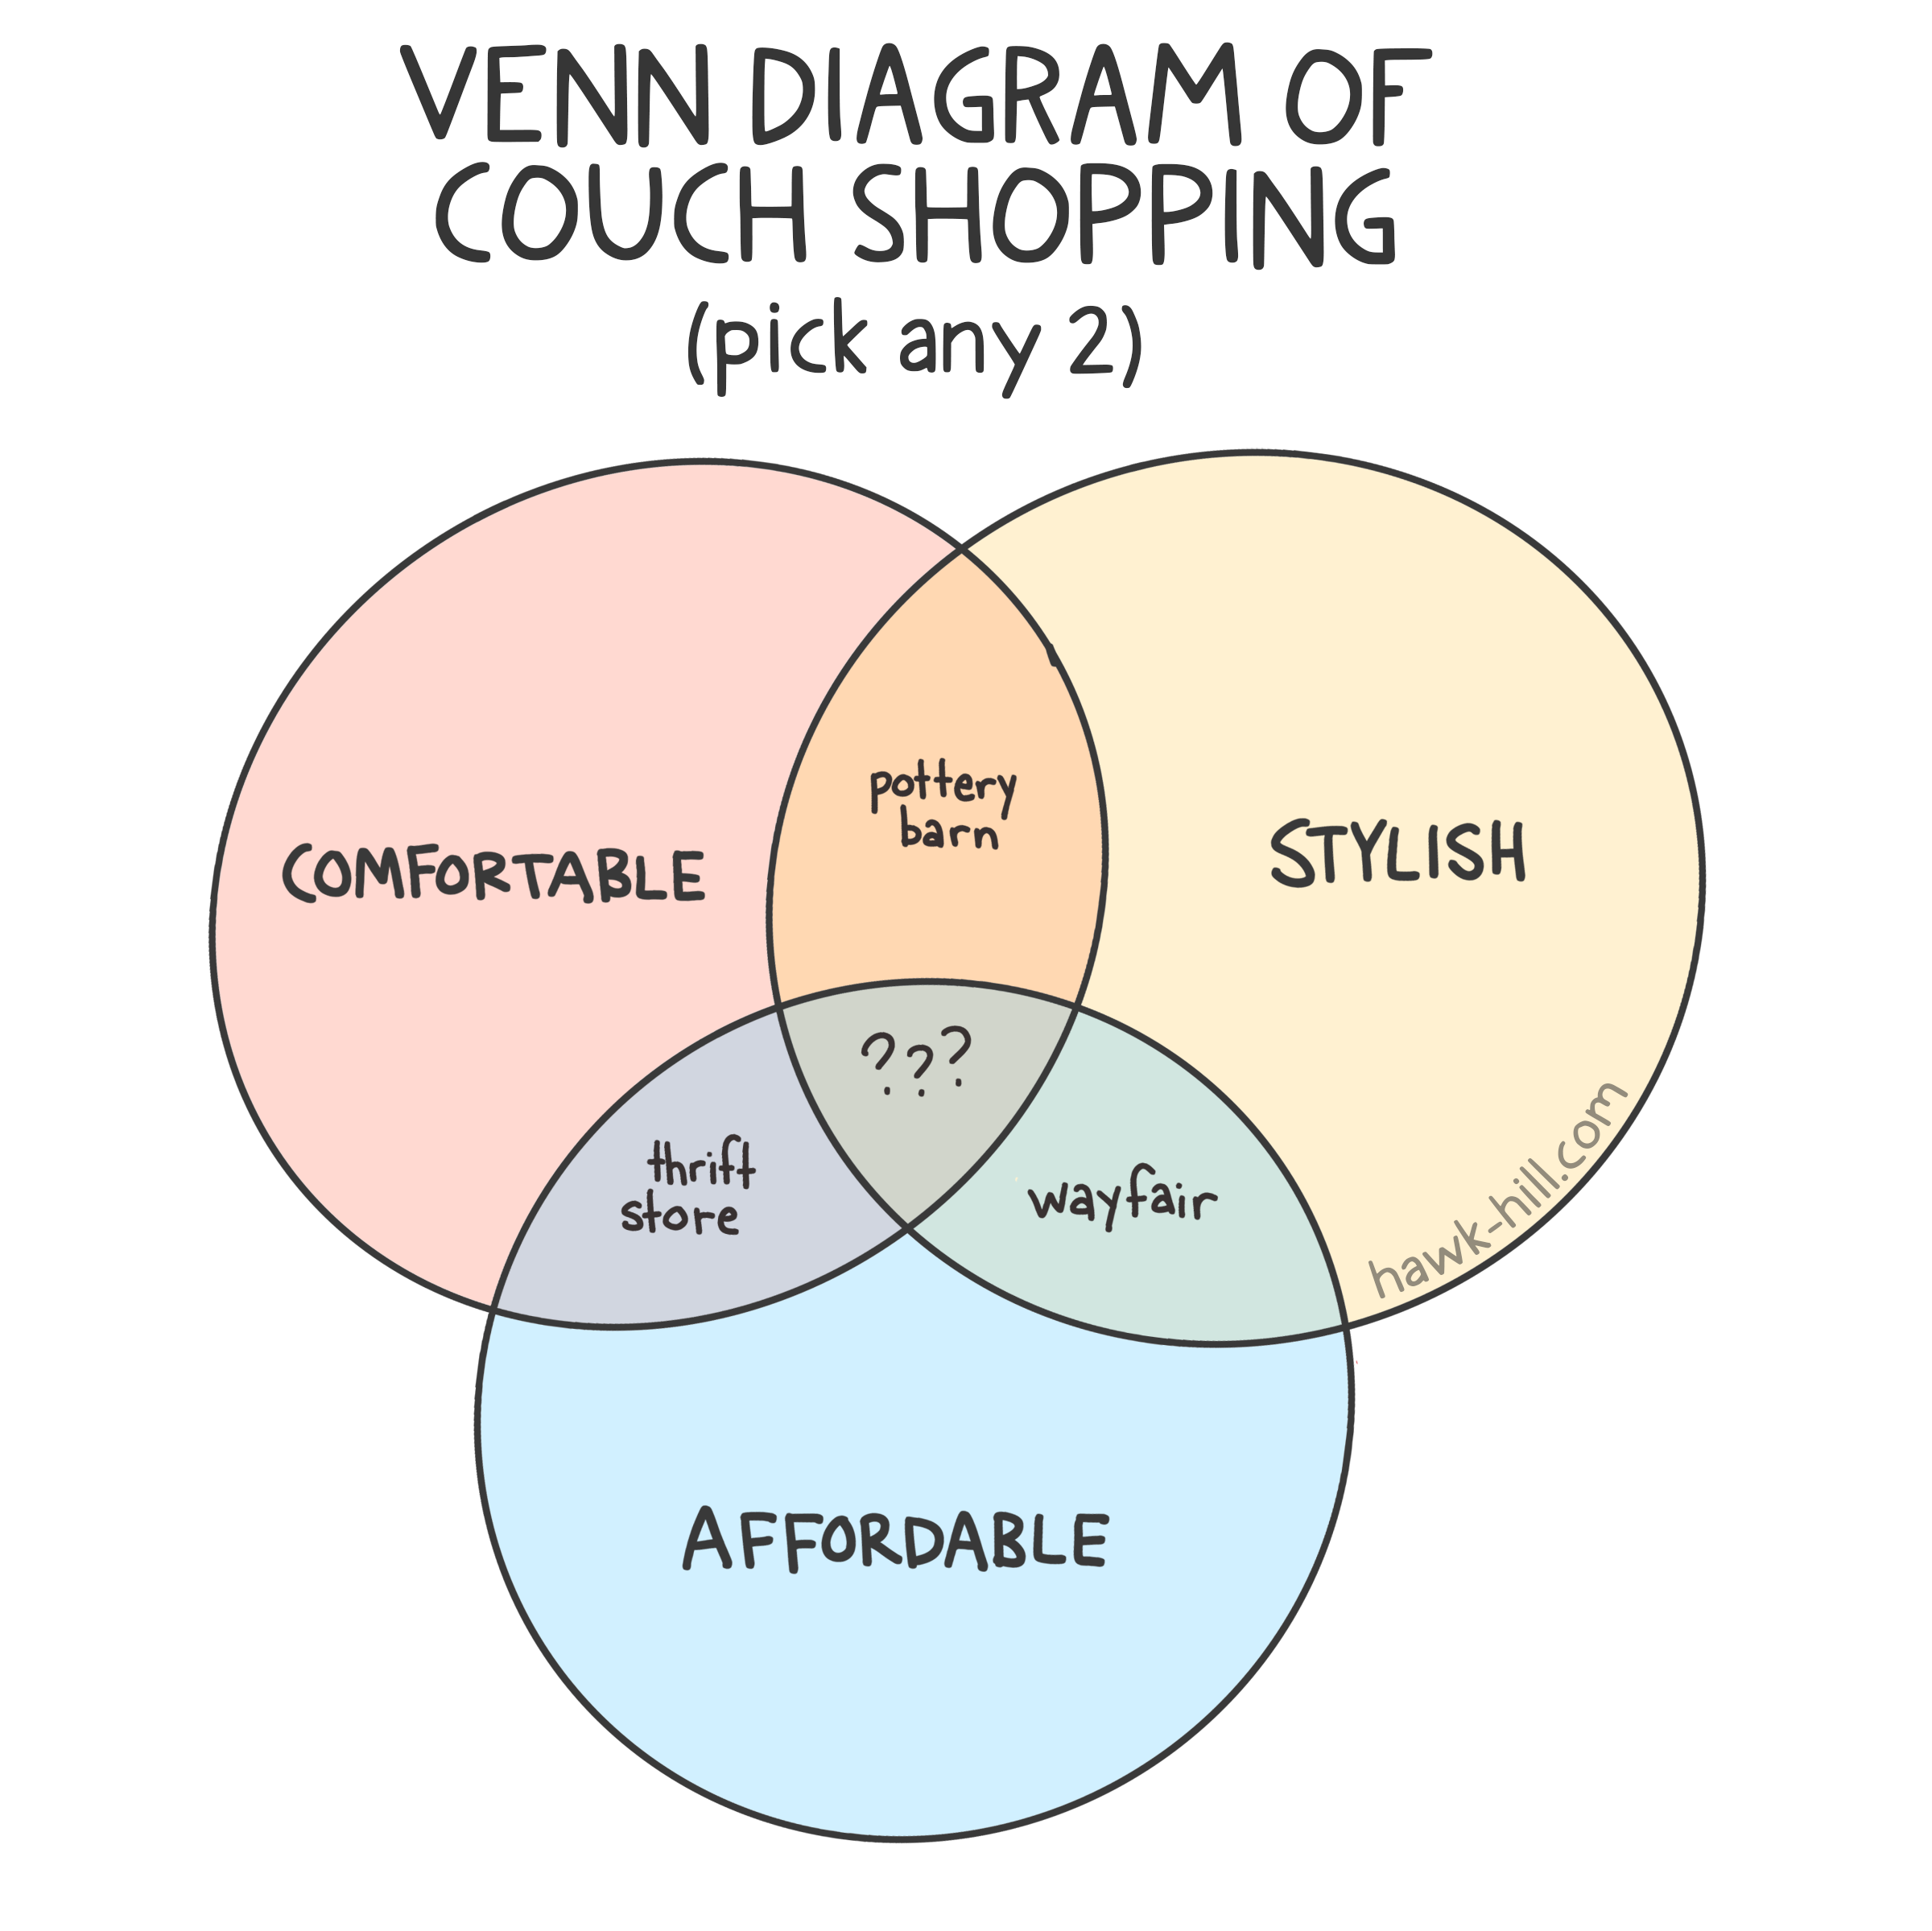 A venn diagram illustration how it is almost impossible to buy a couch that is comfortable, stylish, and also affordable.